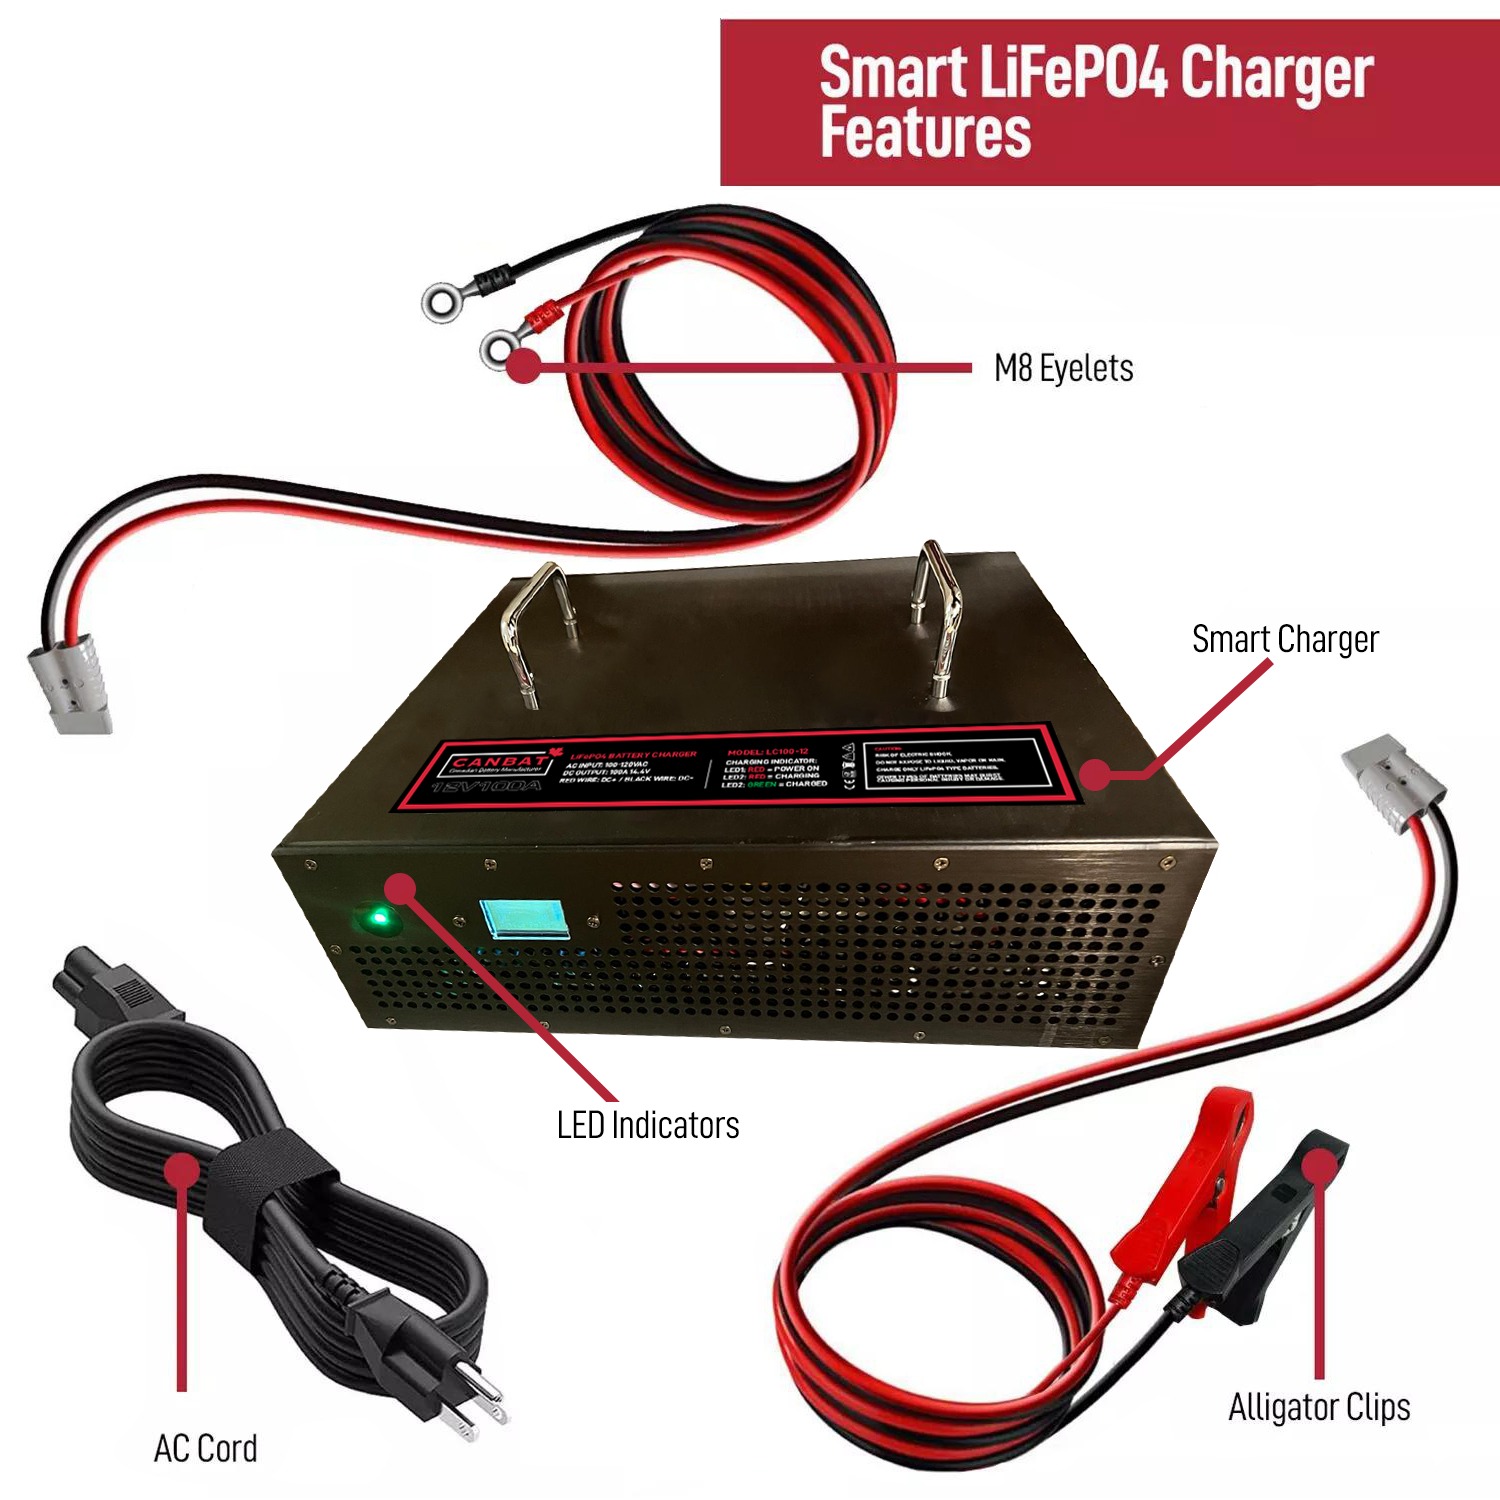 36V 20A LiFePO4 Battery Charger – Lithium Master